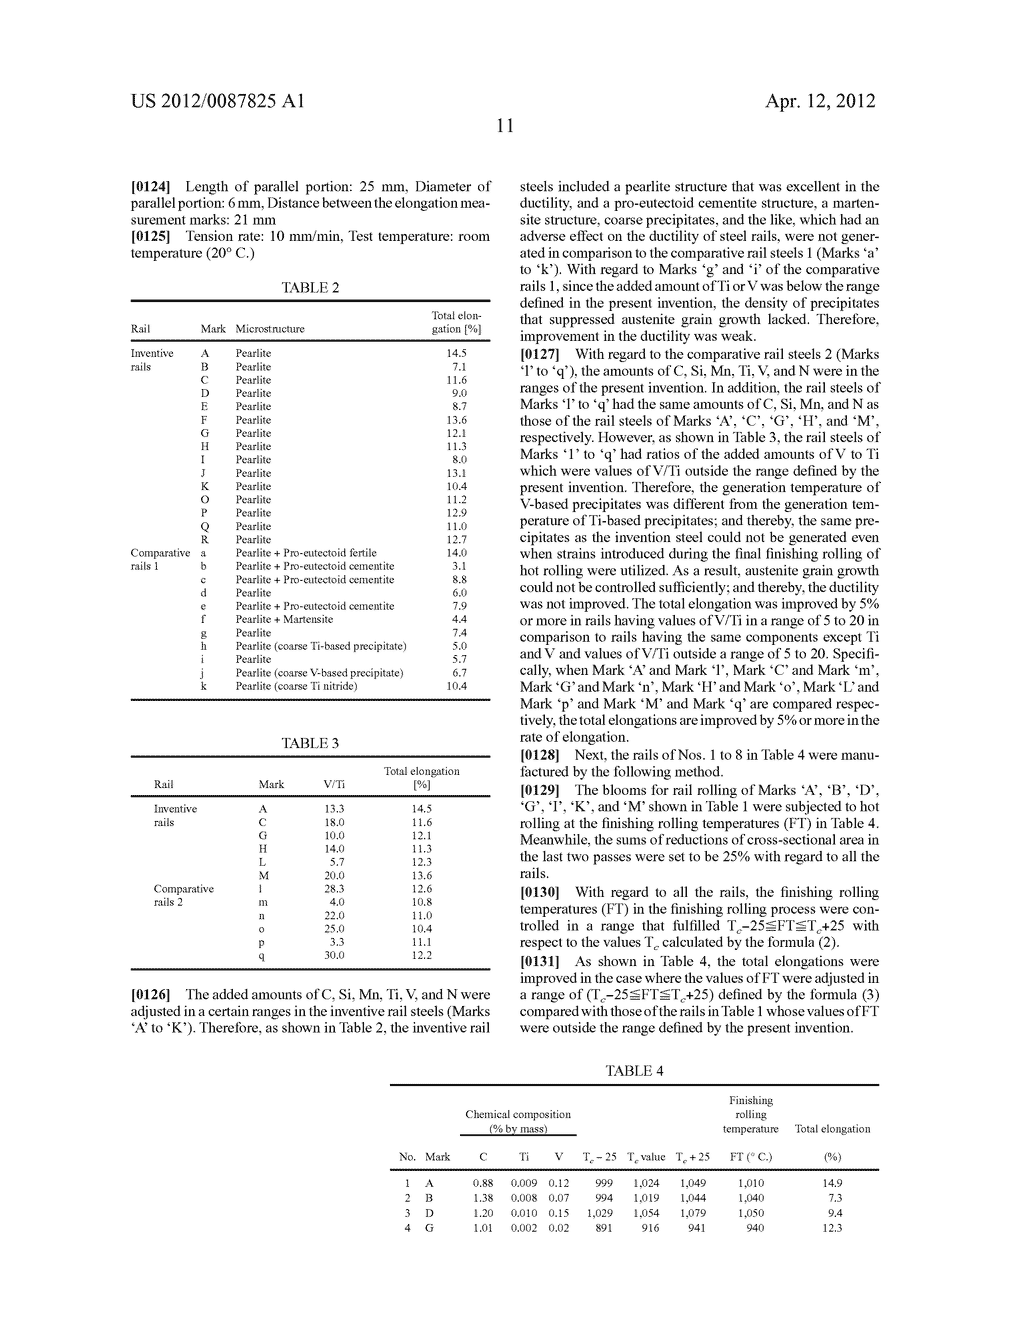 Pearlite-Based High Carbon Steel Rail Having Excellent Ductility And     Process For Production Thereof - diagram, schematic, and image 17